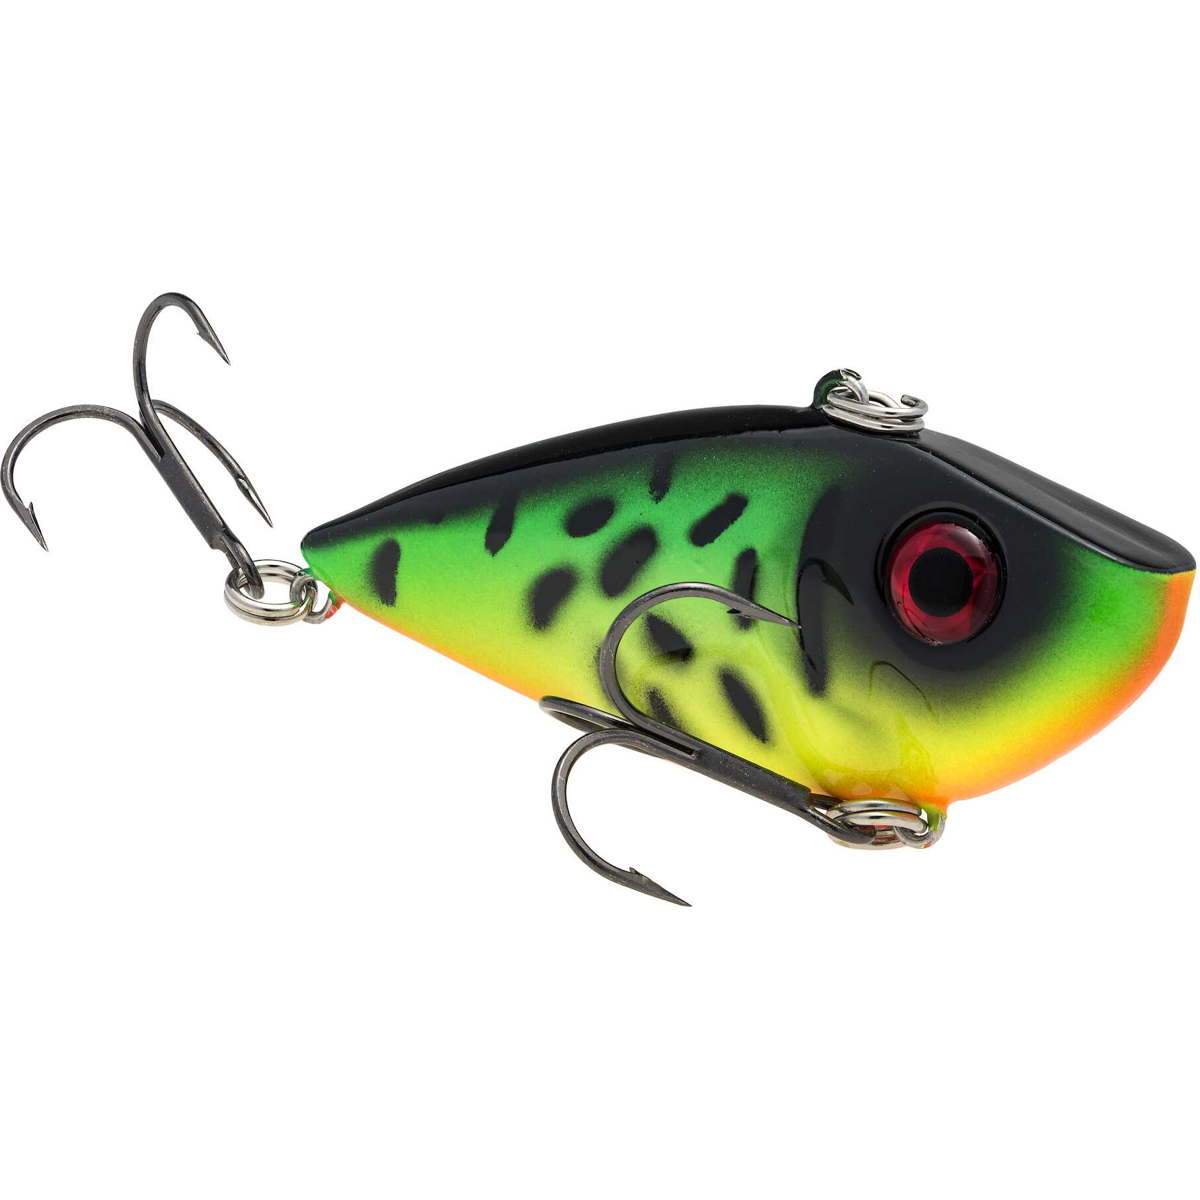 Photo of Strike King Red Eyed Shad Crankbait for sale at United Tackle Shops.